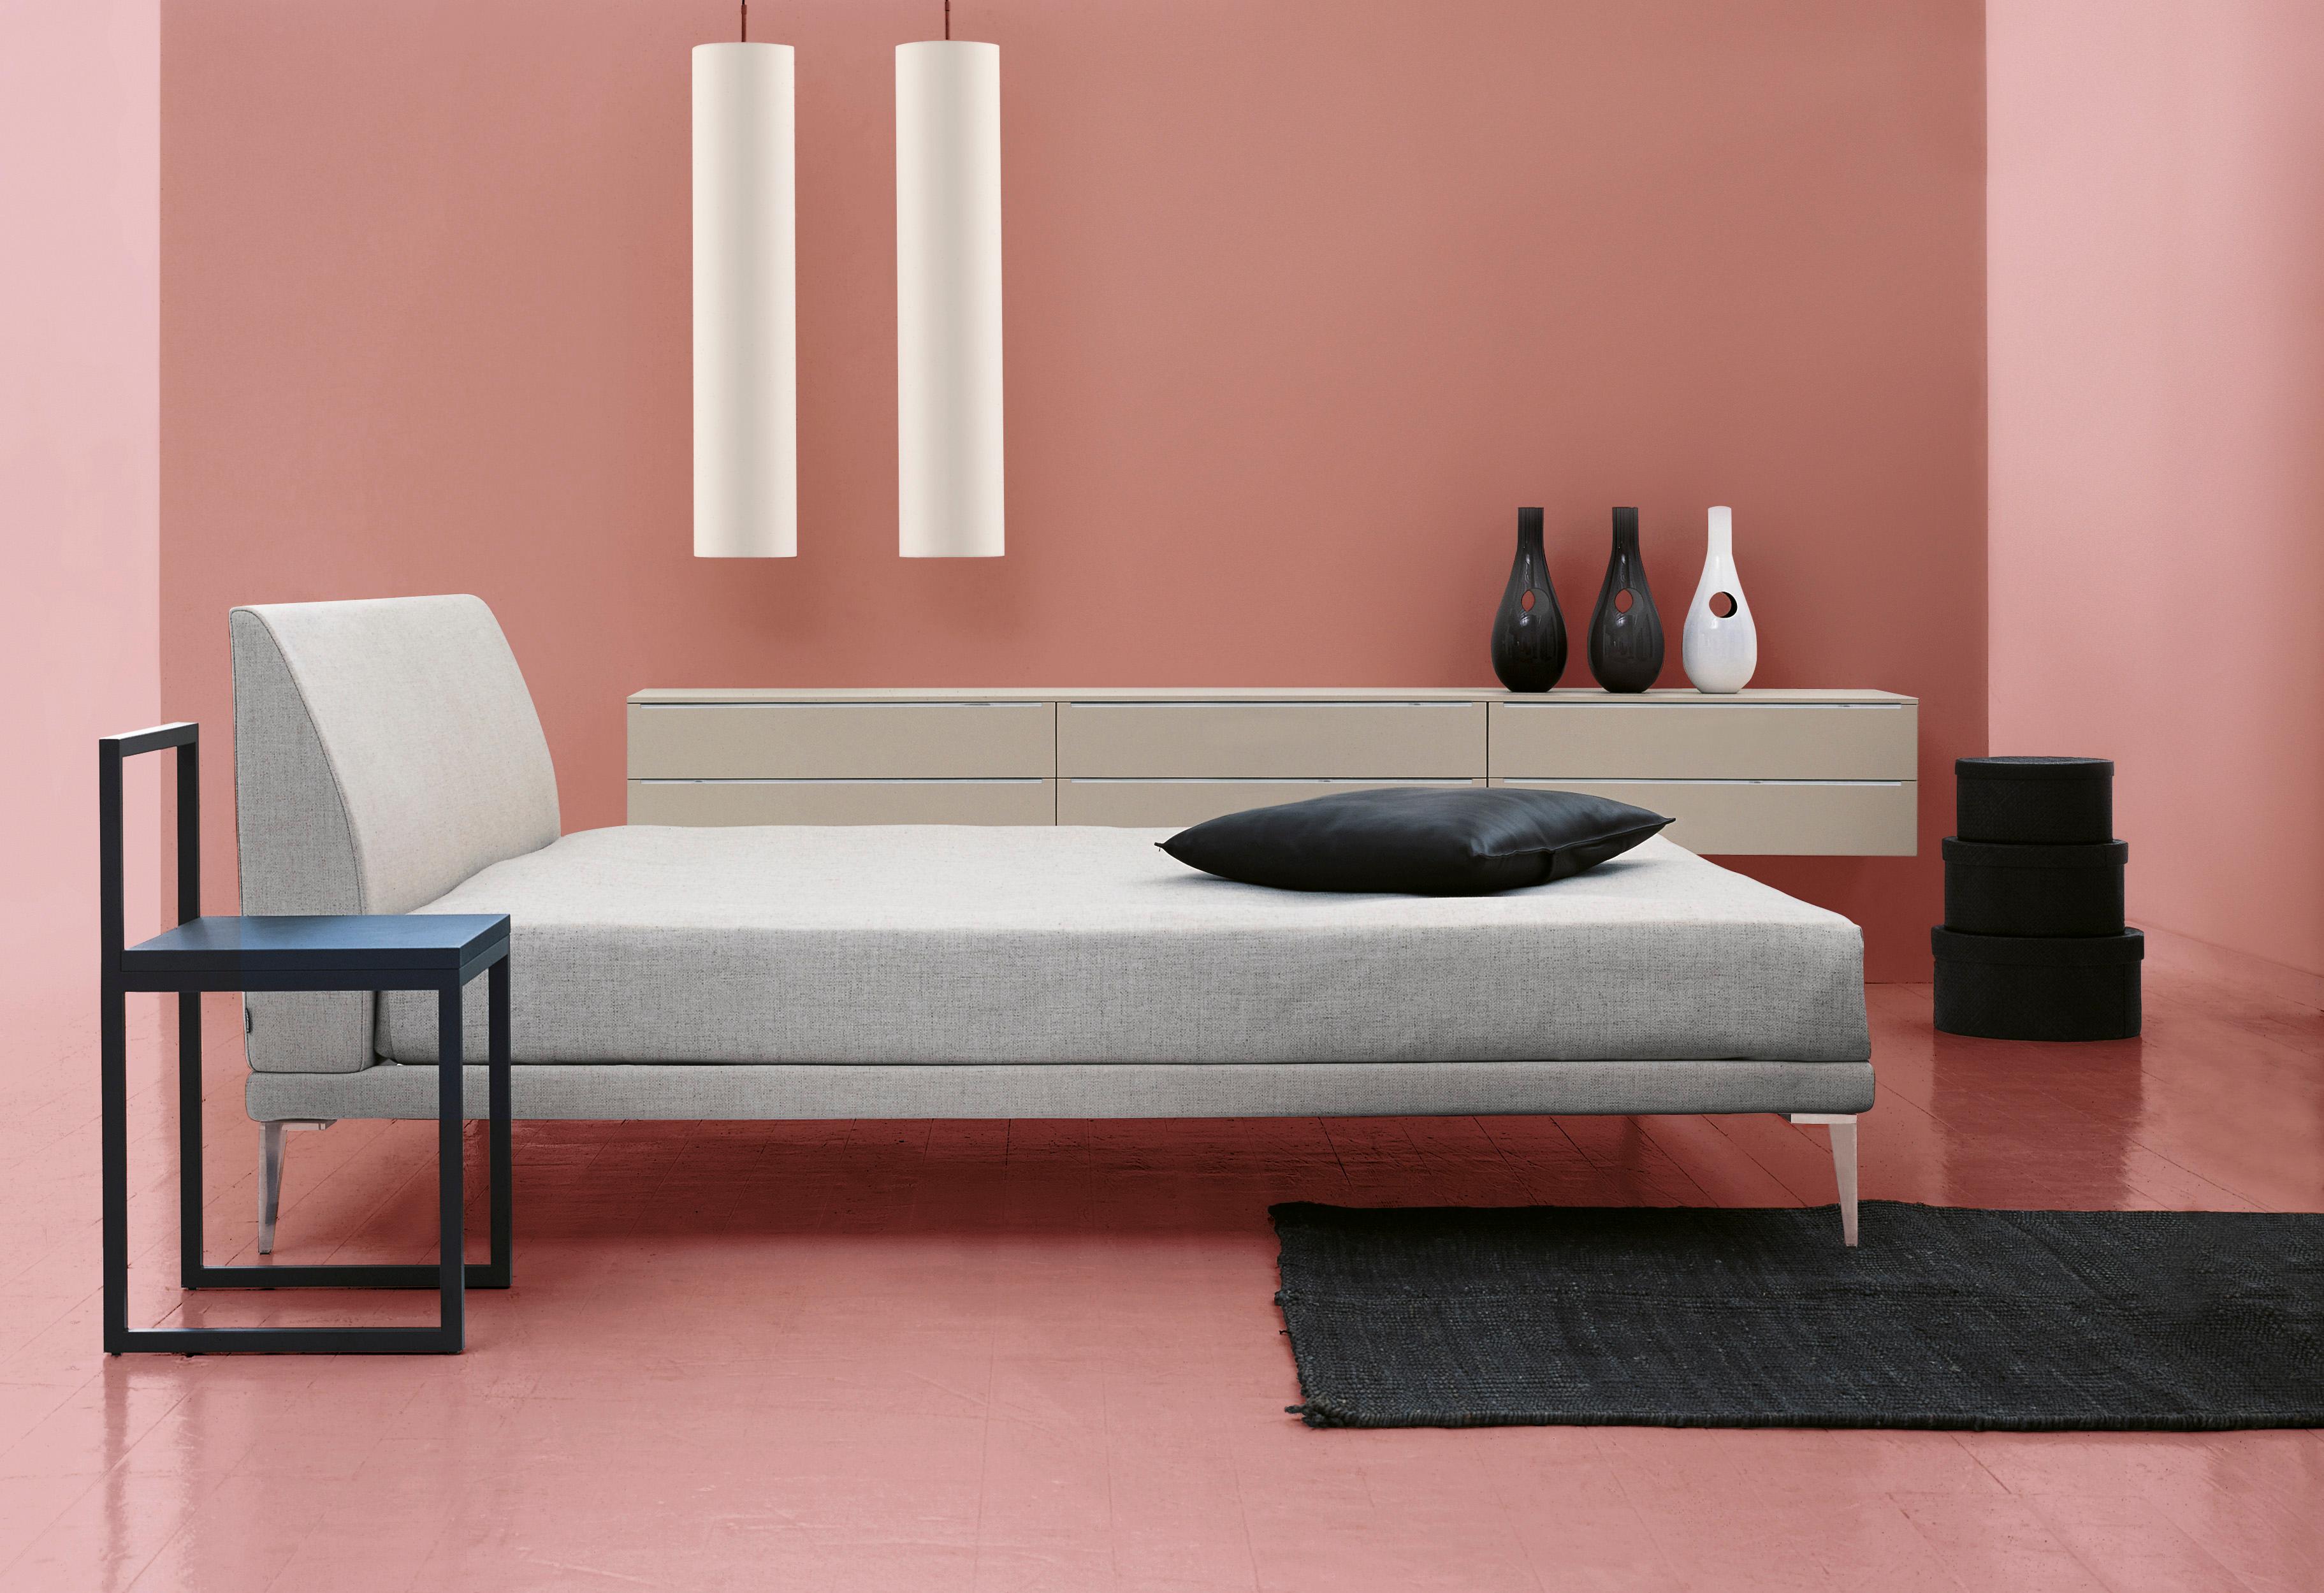 Characterized by the authentic appeal of a true archetype, bed by Jasper Morrison has held a well-earned place in the Cappellini collection for nearly 30 years. This padded bed has a metal and wood frame with staves, the padding is in multi-density